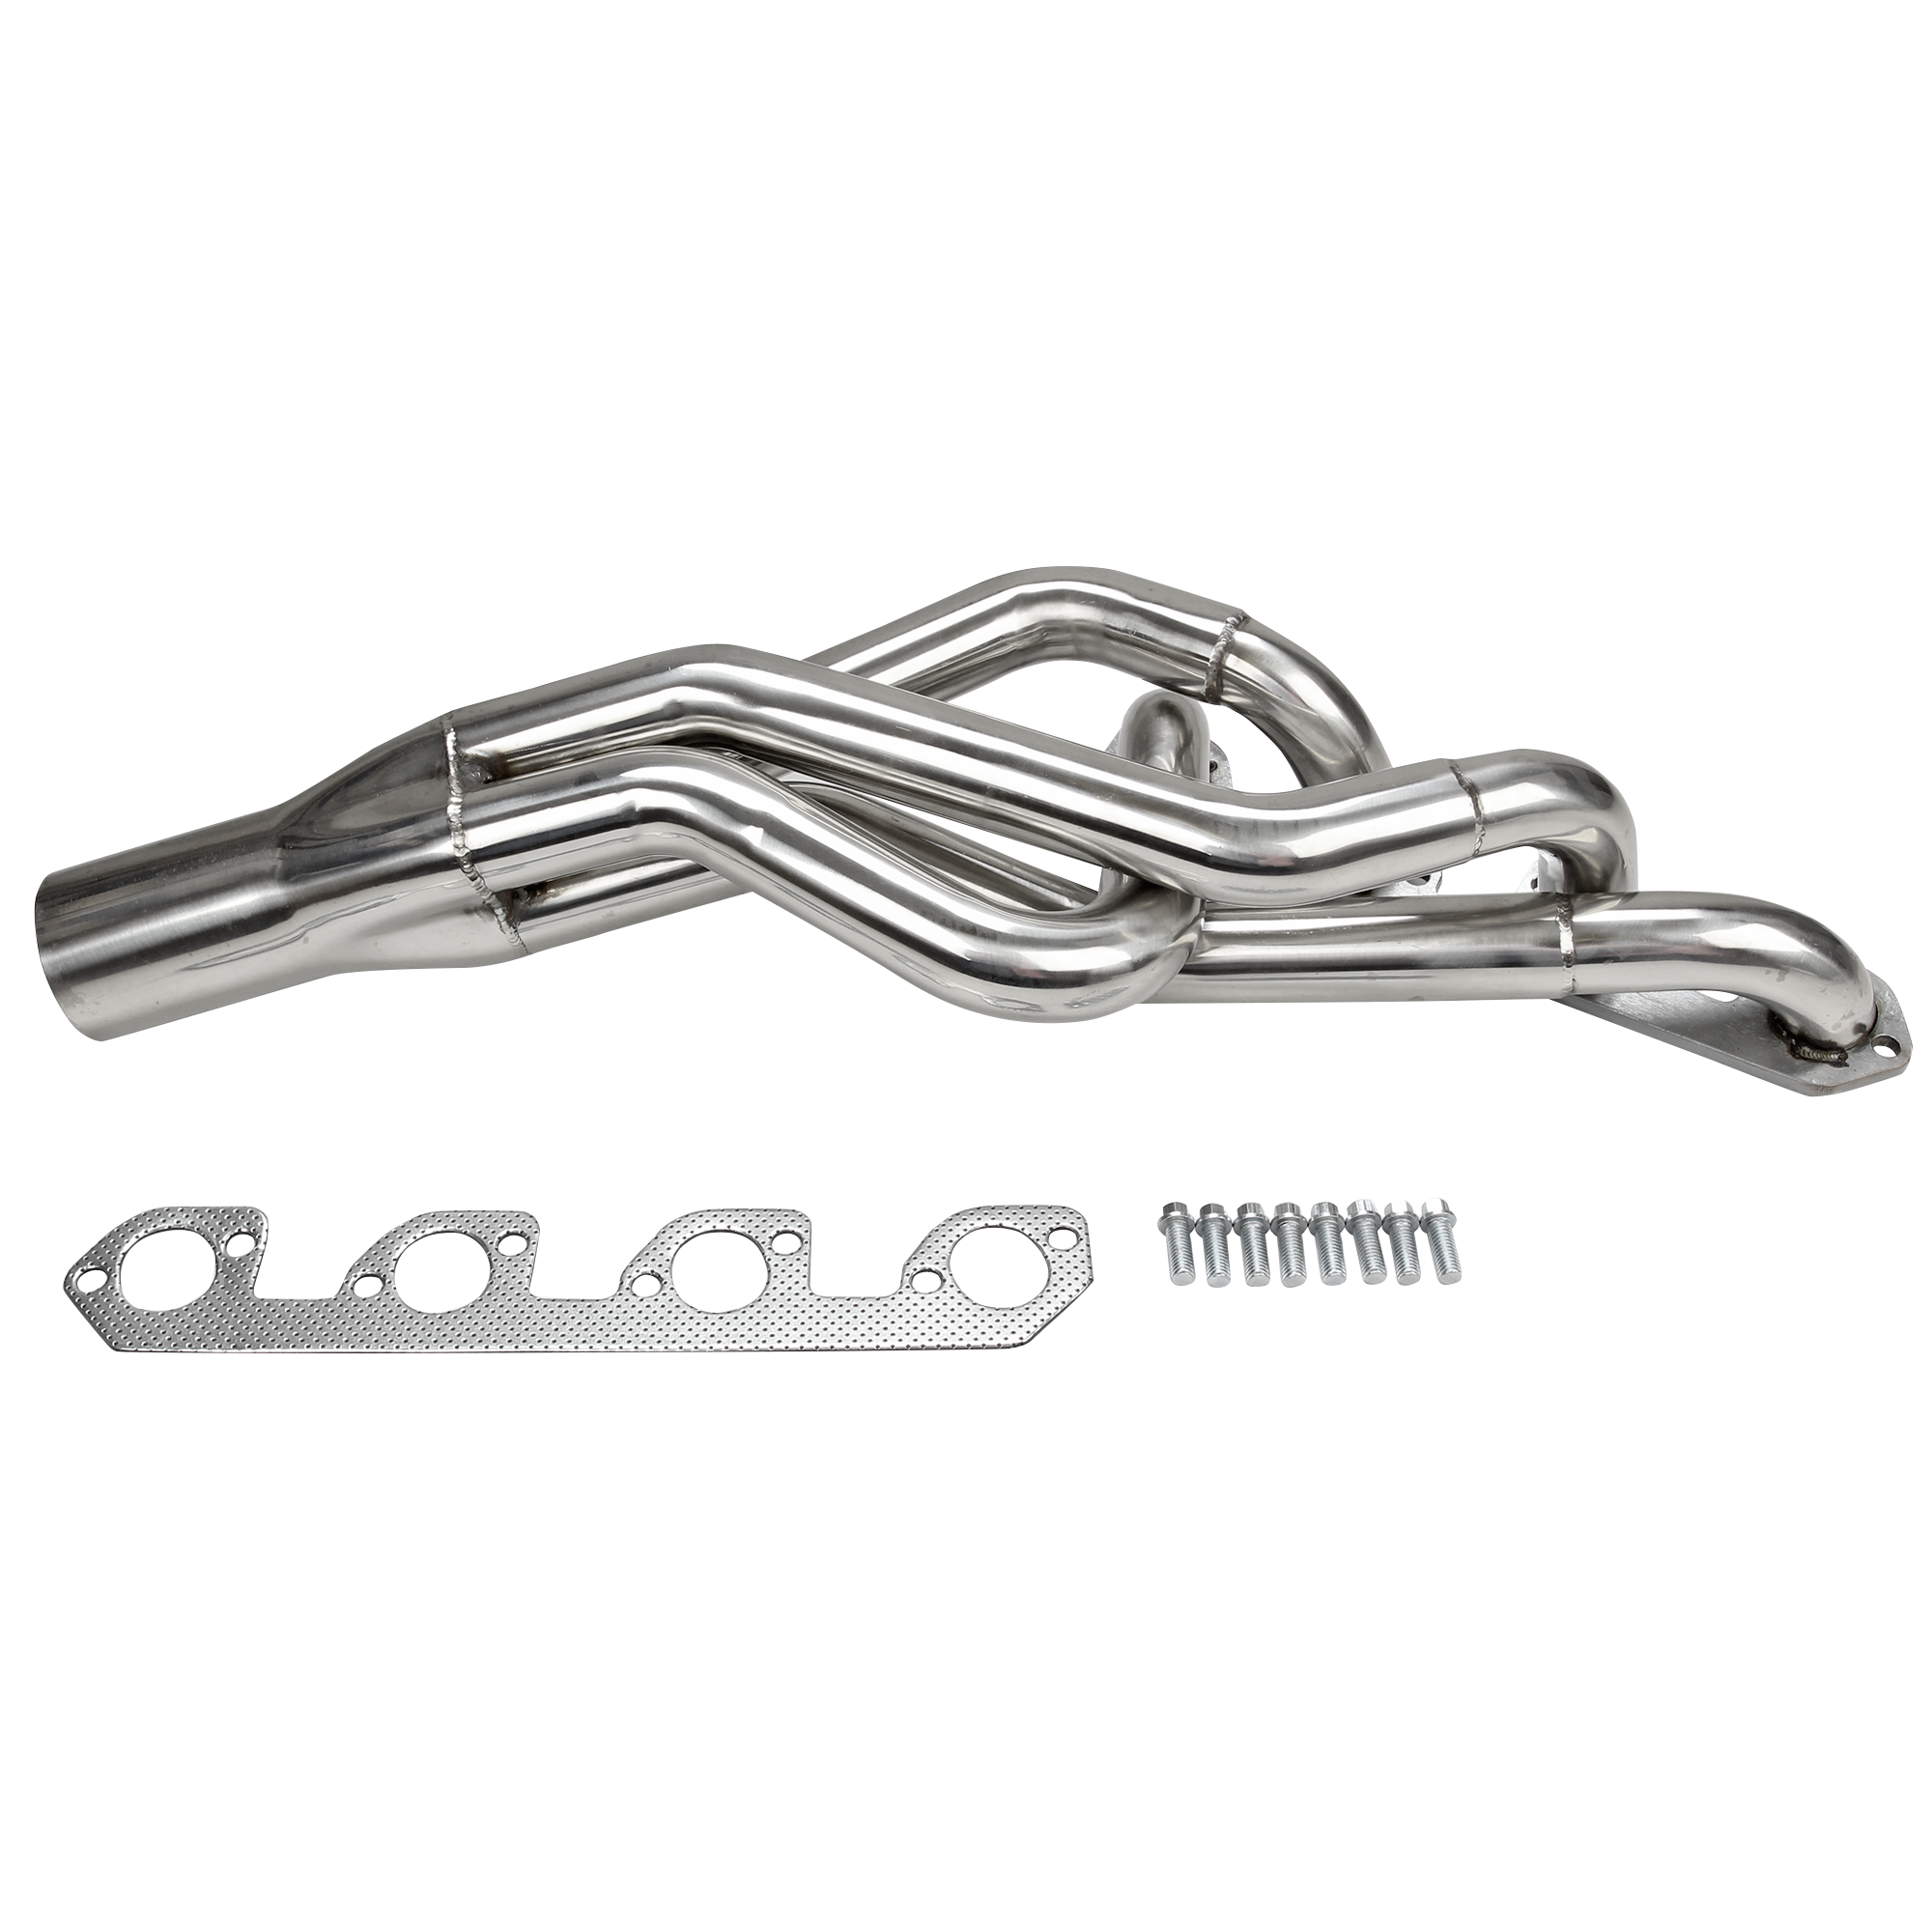 Stainless Exhaust Manifold Header for 1974-1980 Ford Pinto Mustang 2.3L